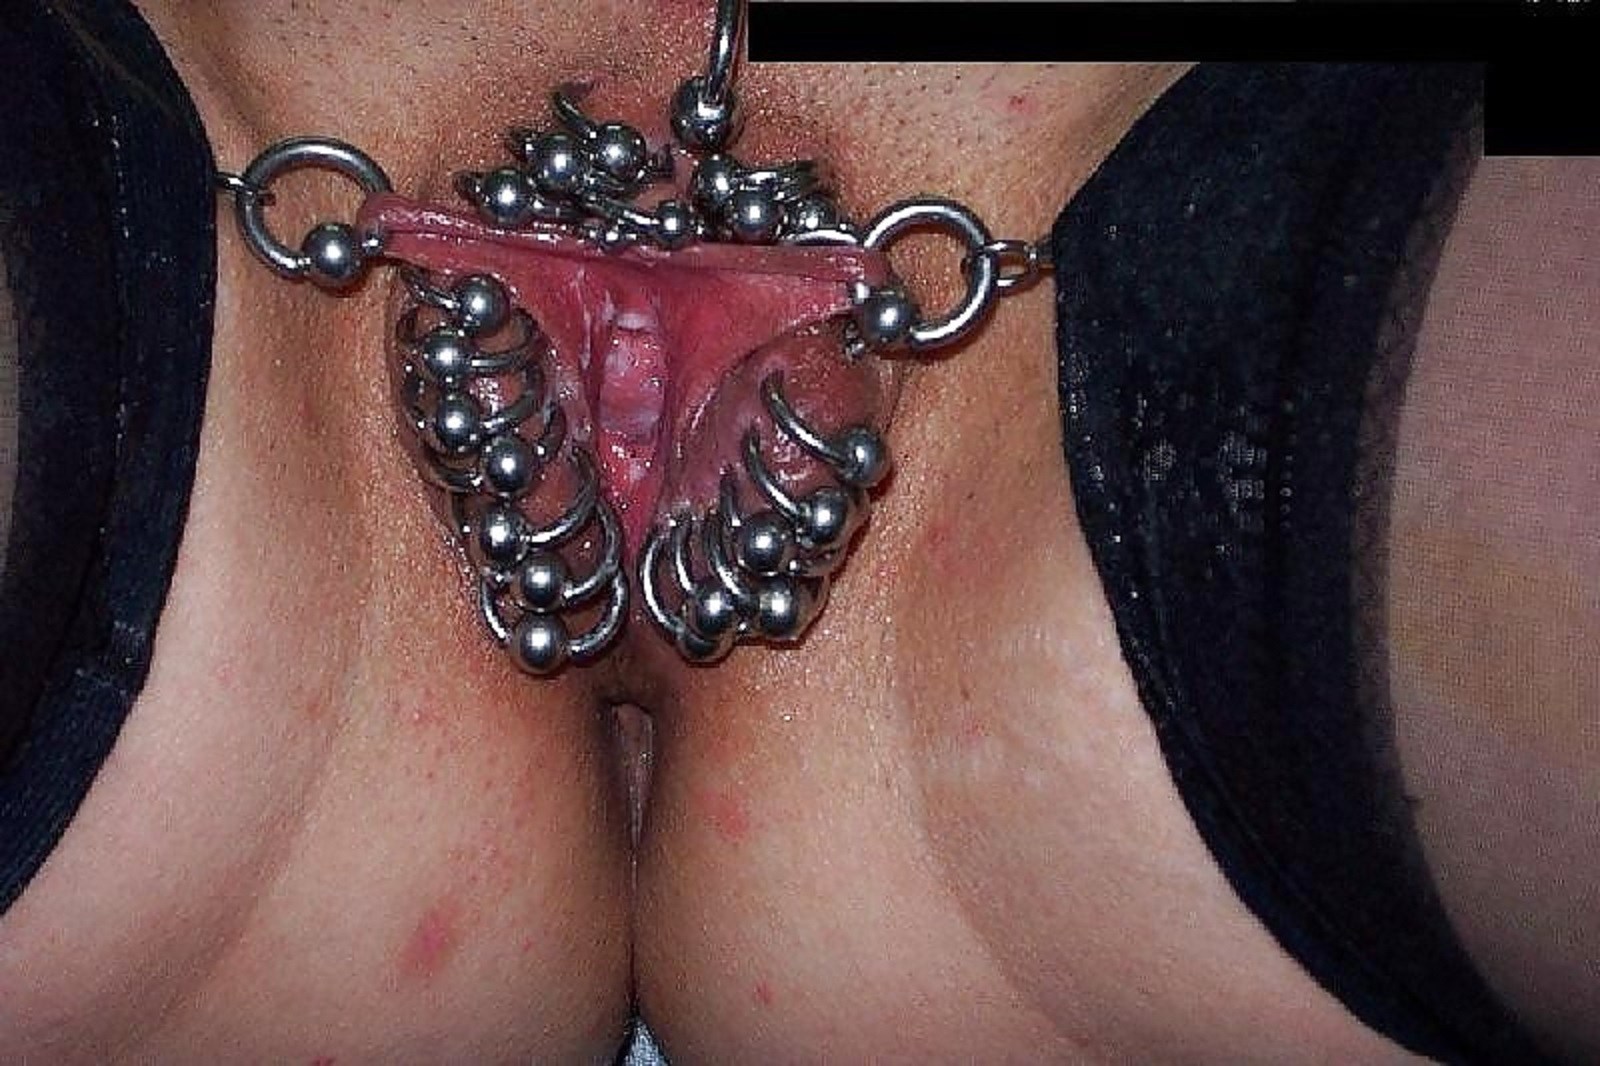 Extrem piercing pussy